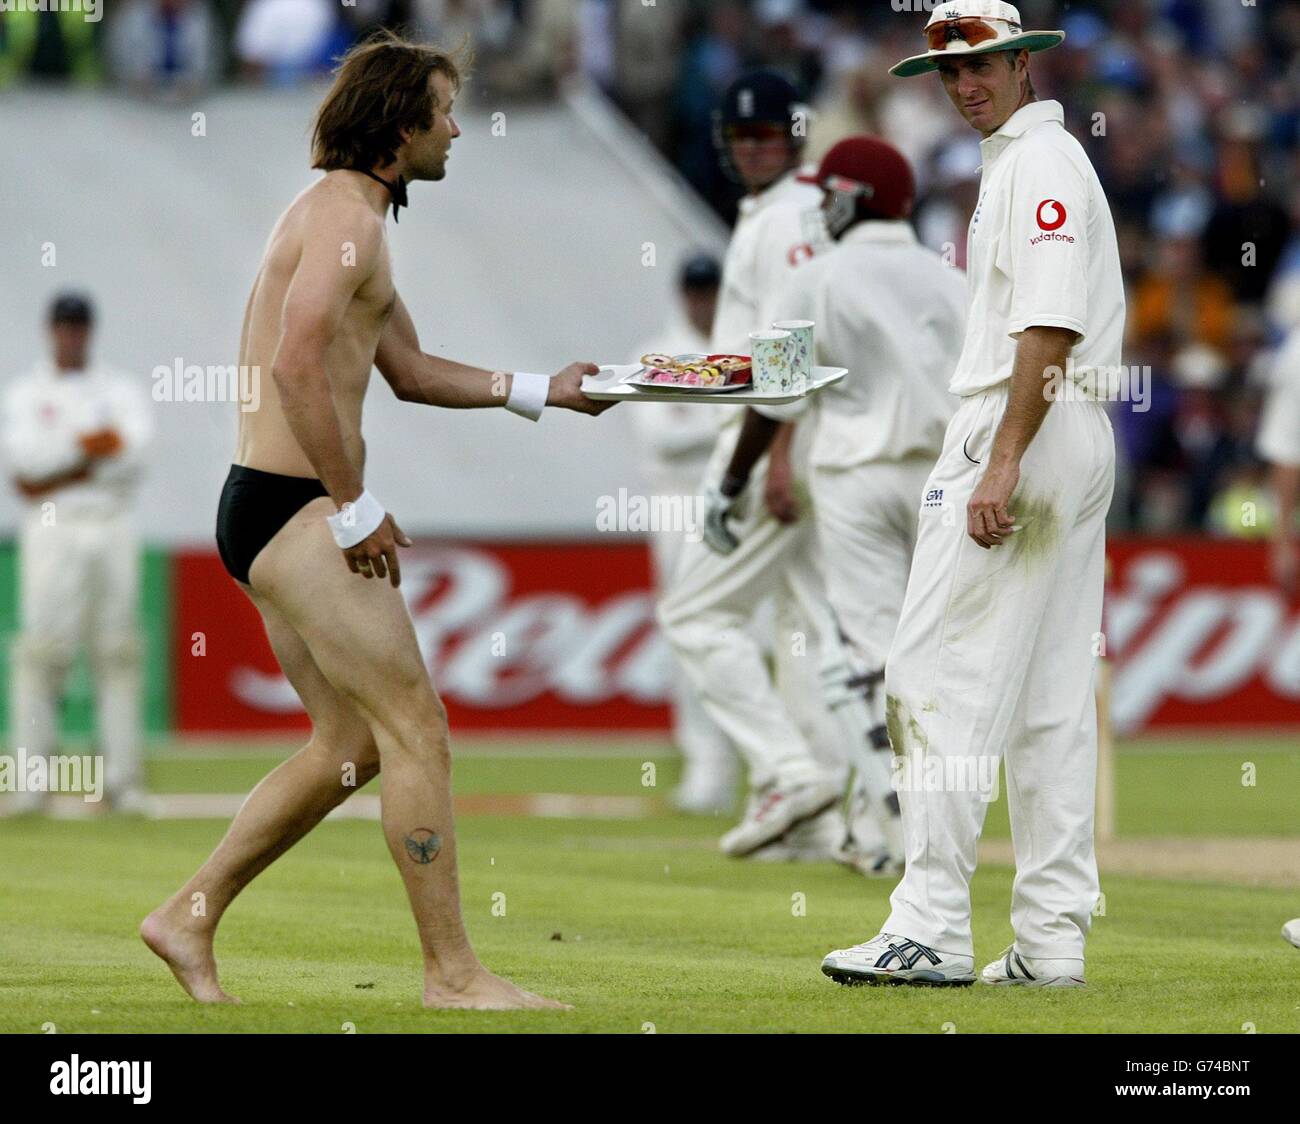 England captain Michael Vaughan looks at the streaker holding a tea tray, during the first day of the third npower test against West Indies at Old Trafford, Manchester. Stock Photo